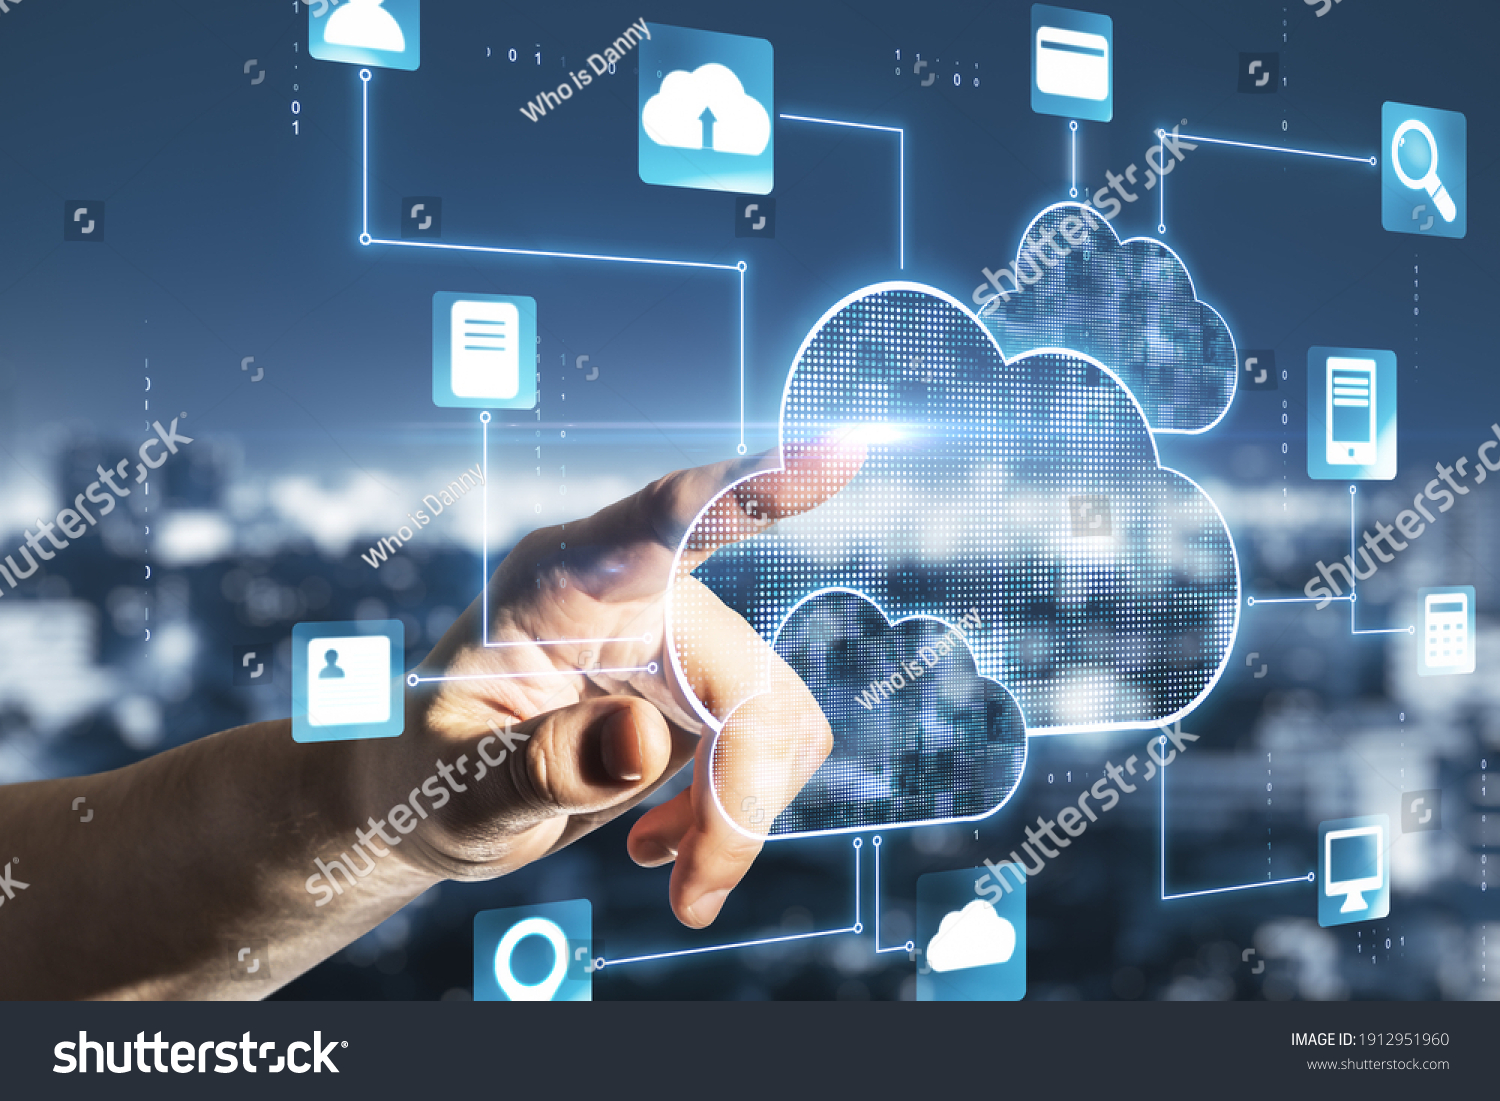 Cloud service concept with man finger touching digital screen with cloud service application icons at abstract city background #1912951960